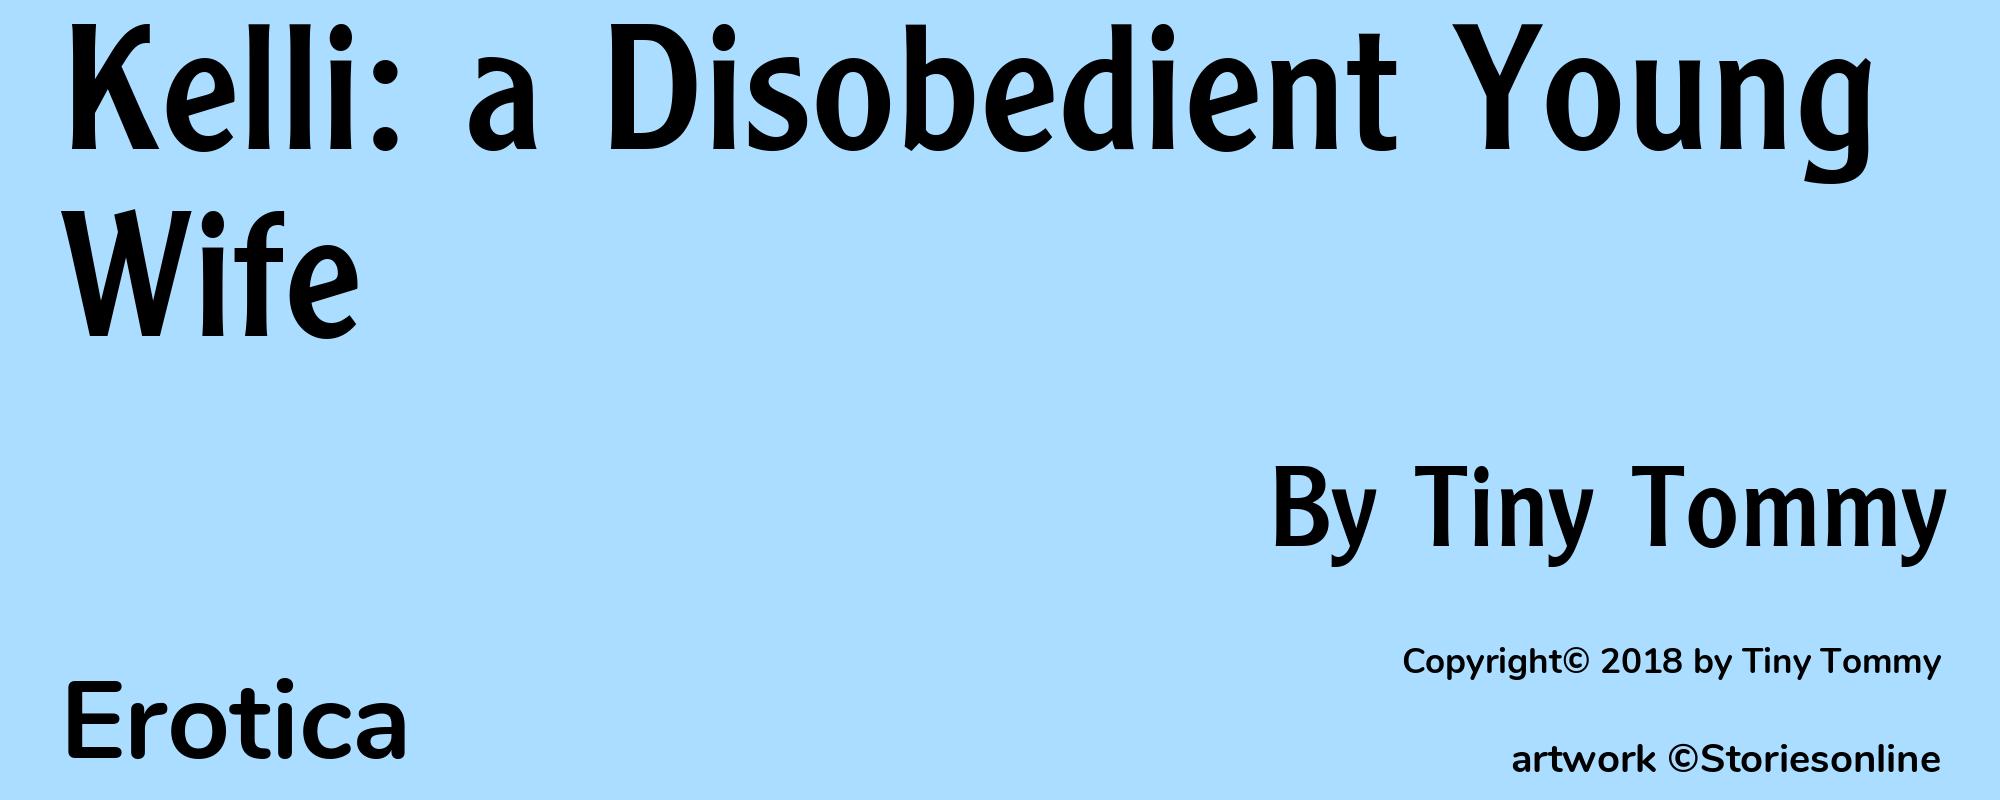 Kelli: a Disobedient Young Wife - Cover